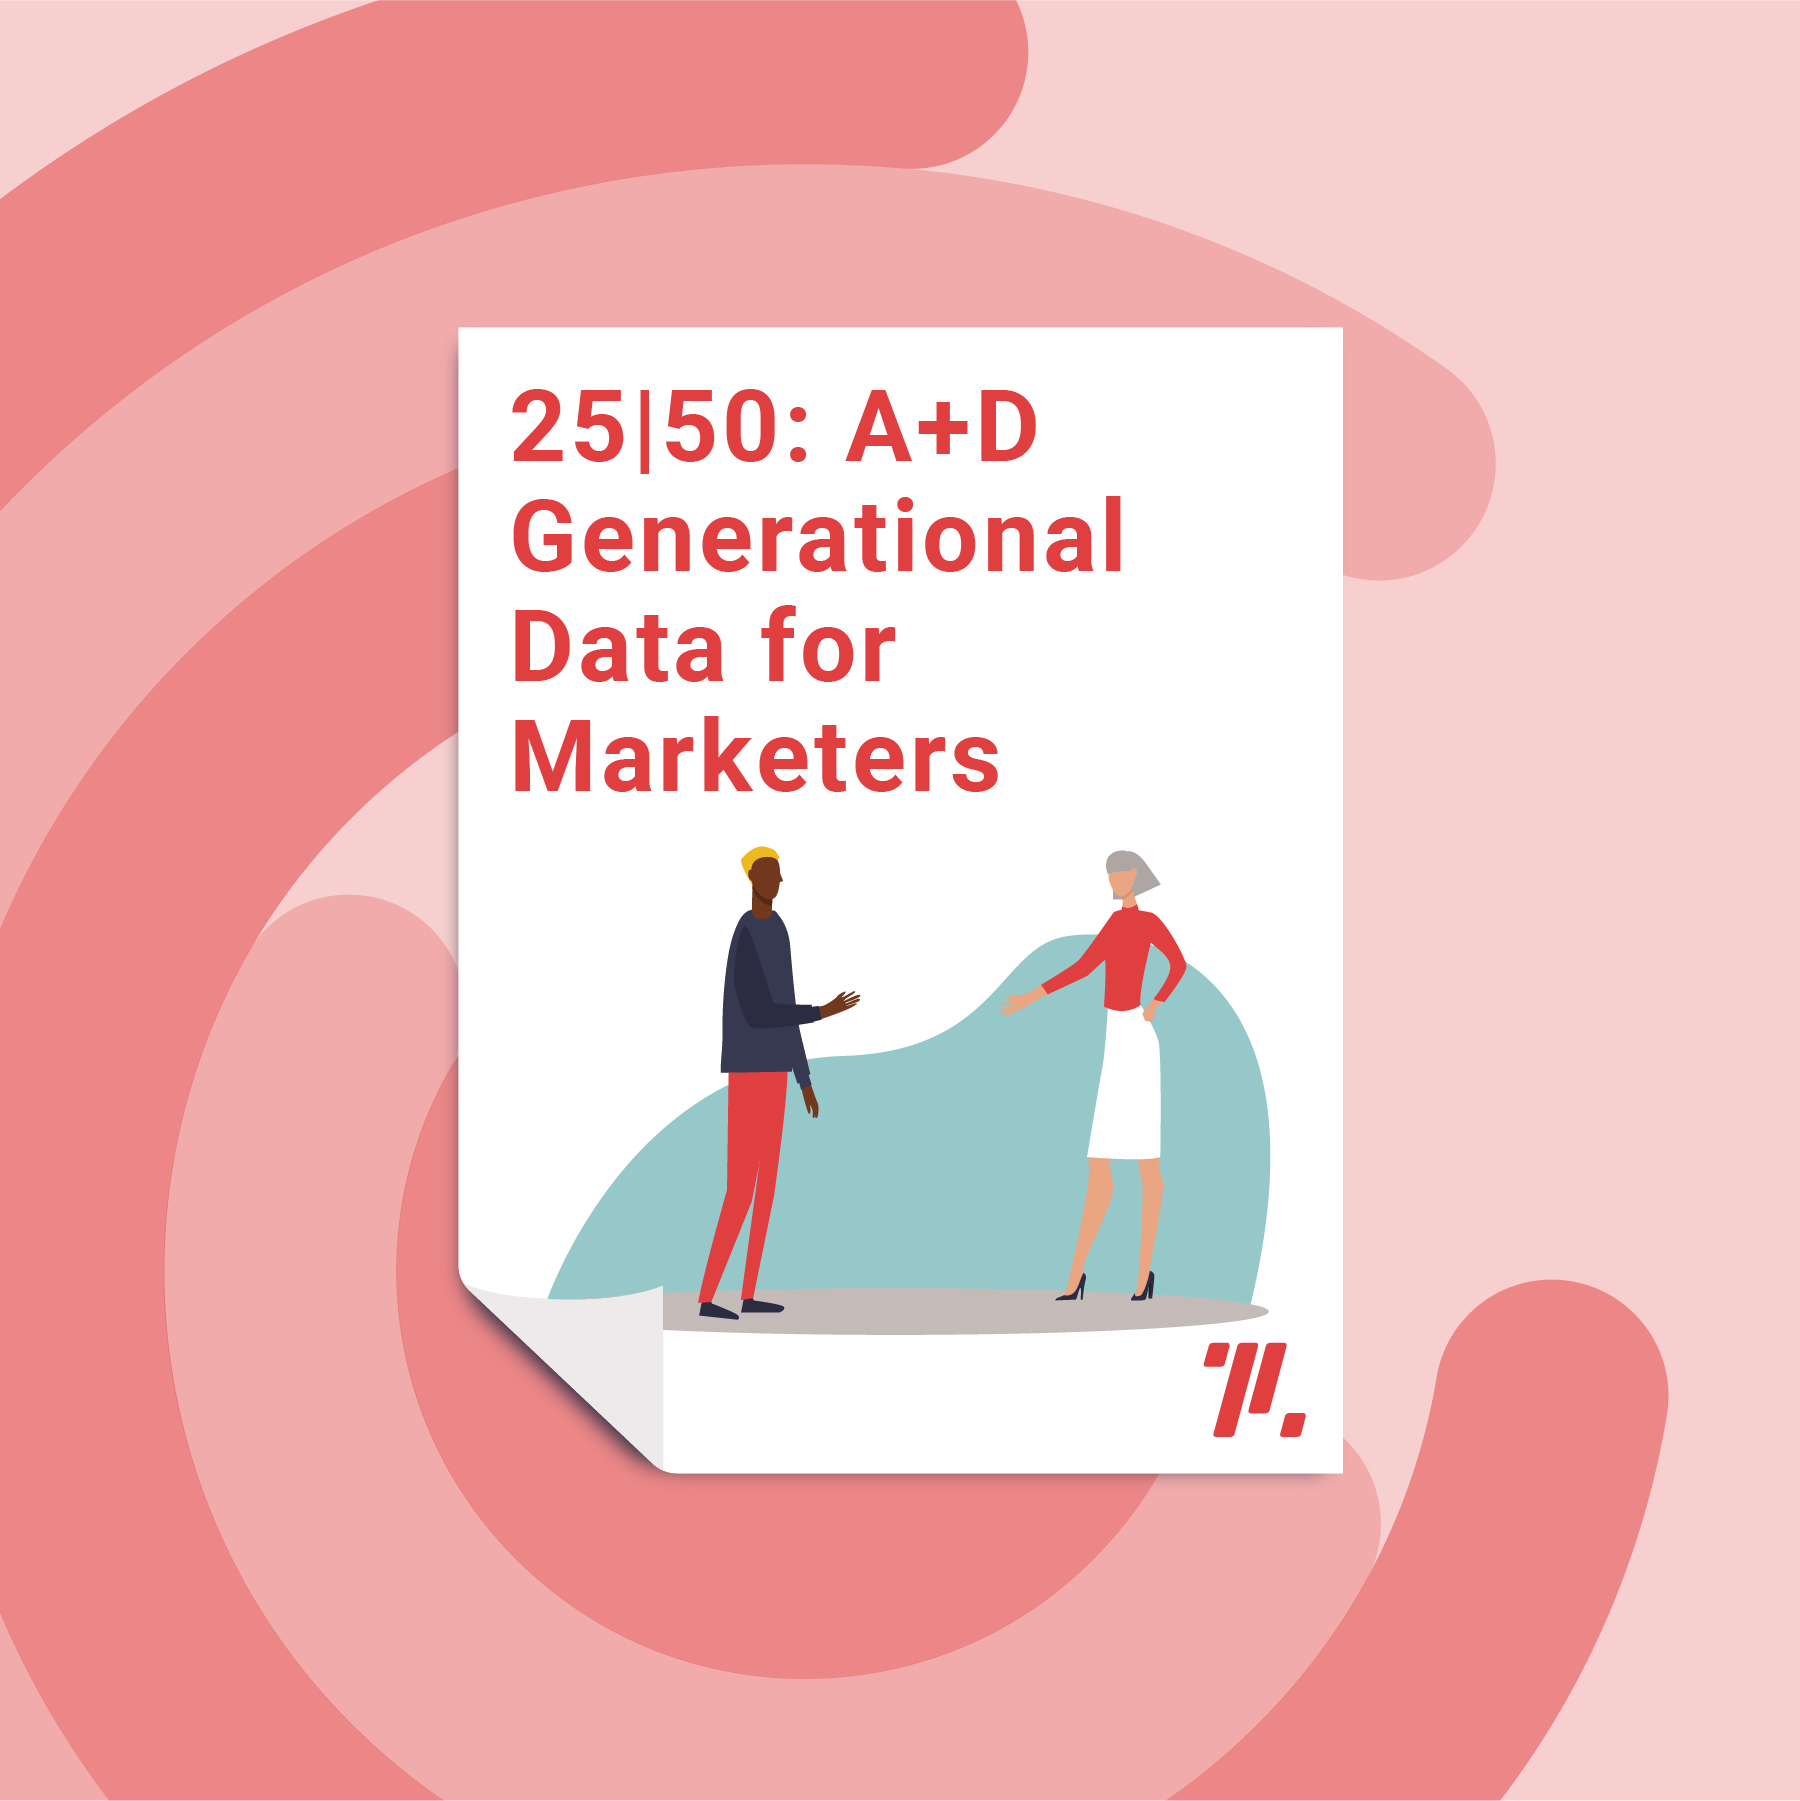 thinklab 25 50 a&d generational data for marketers